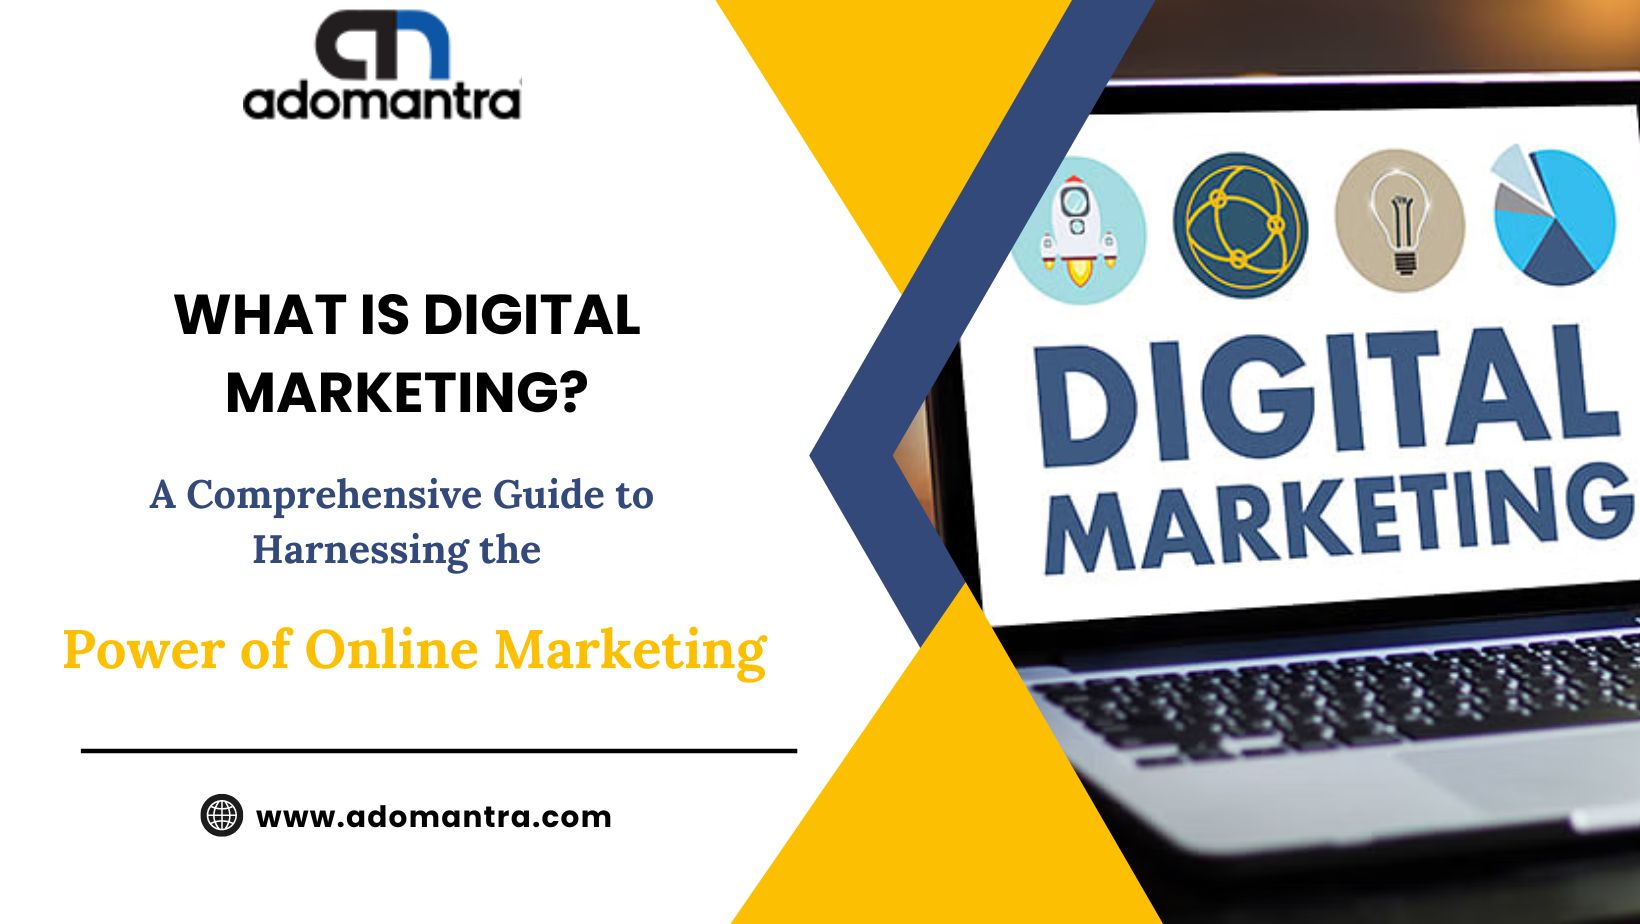 What Is Digital Marketing? A Comprehensive Guide to Harnessing the Power of Online Marketing